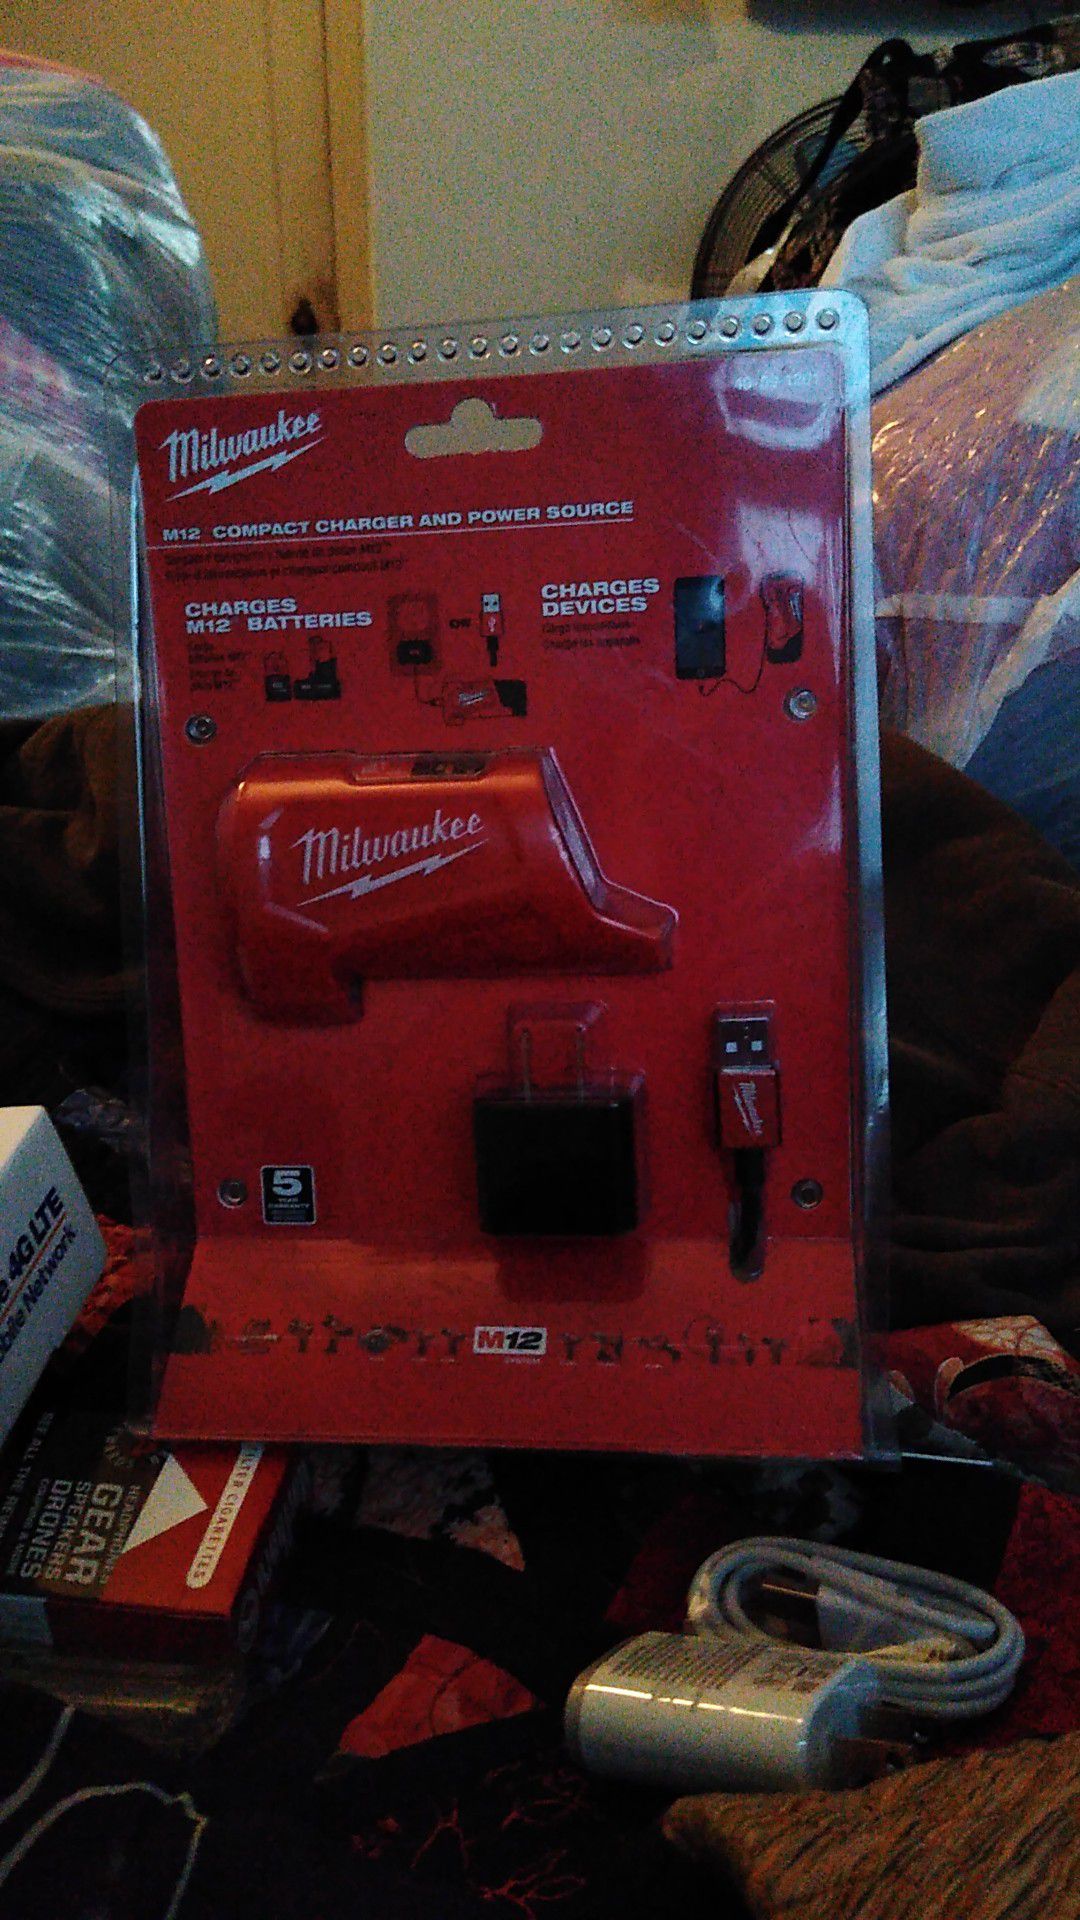 Milwaukee M12 compact power and charger source